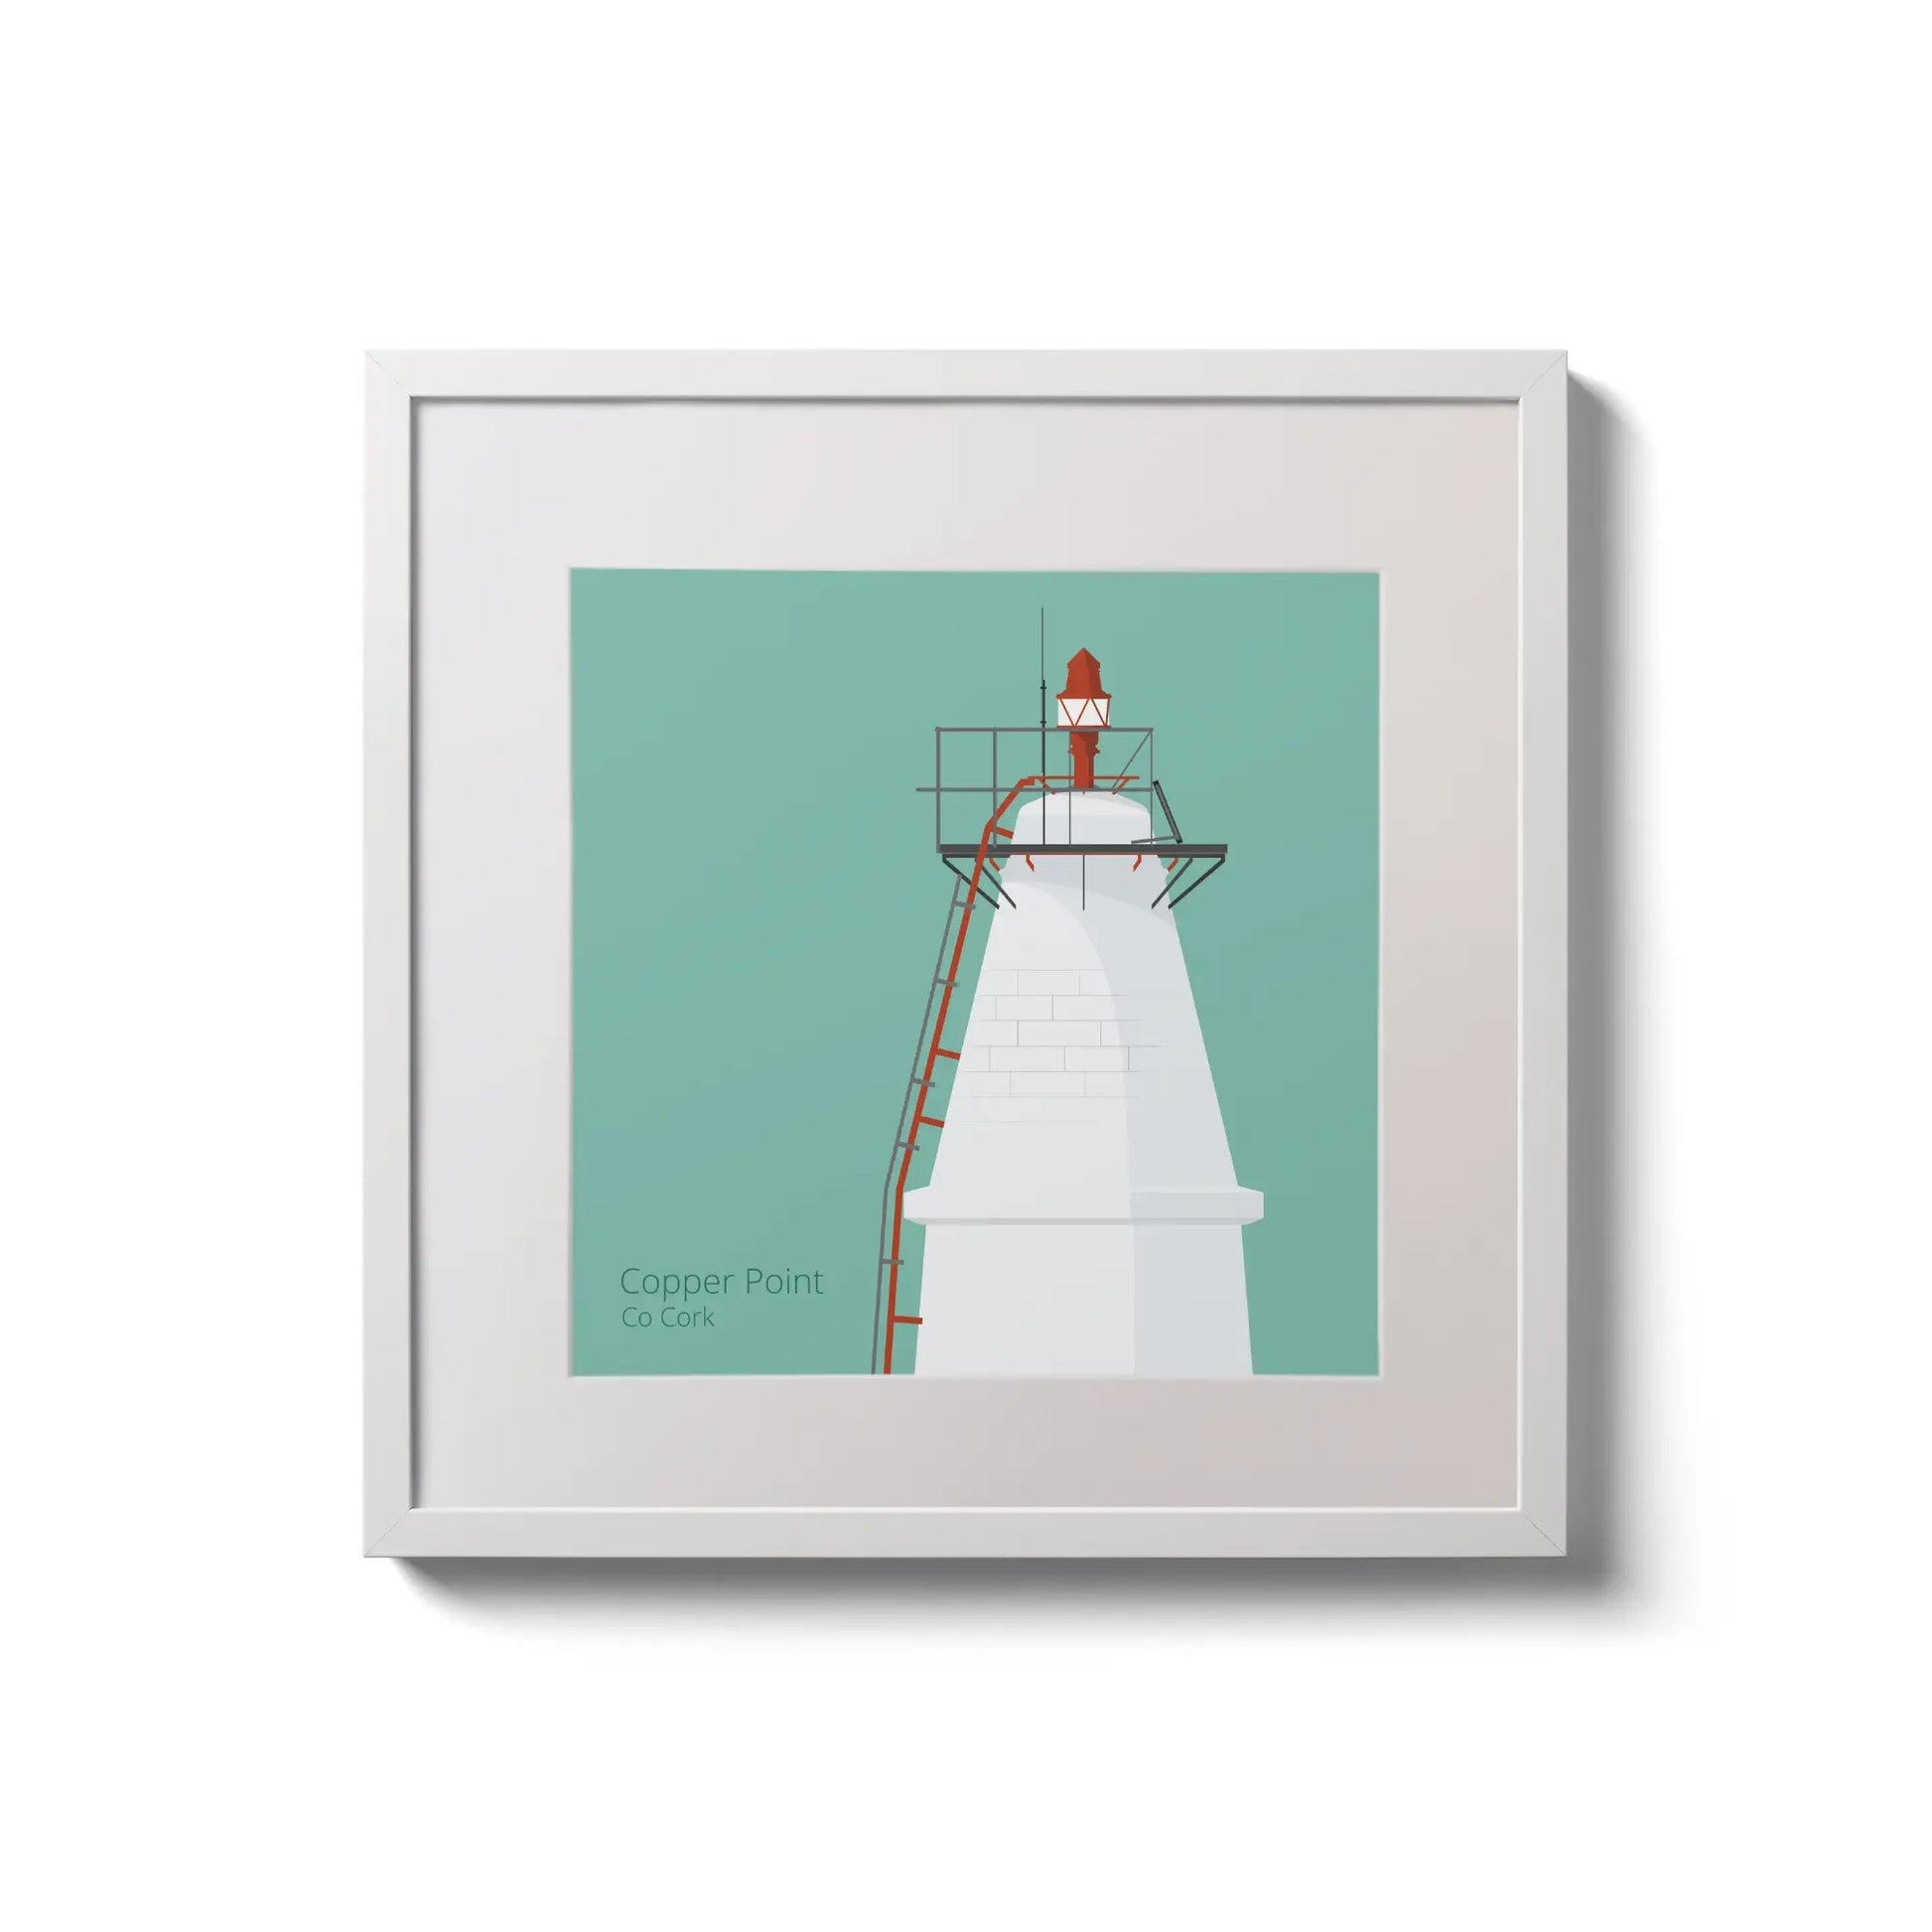 Contemporary wall hanging Copper Point lighthouse on an ocean green background,  in a white square frame measuring 20x20cm.